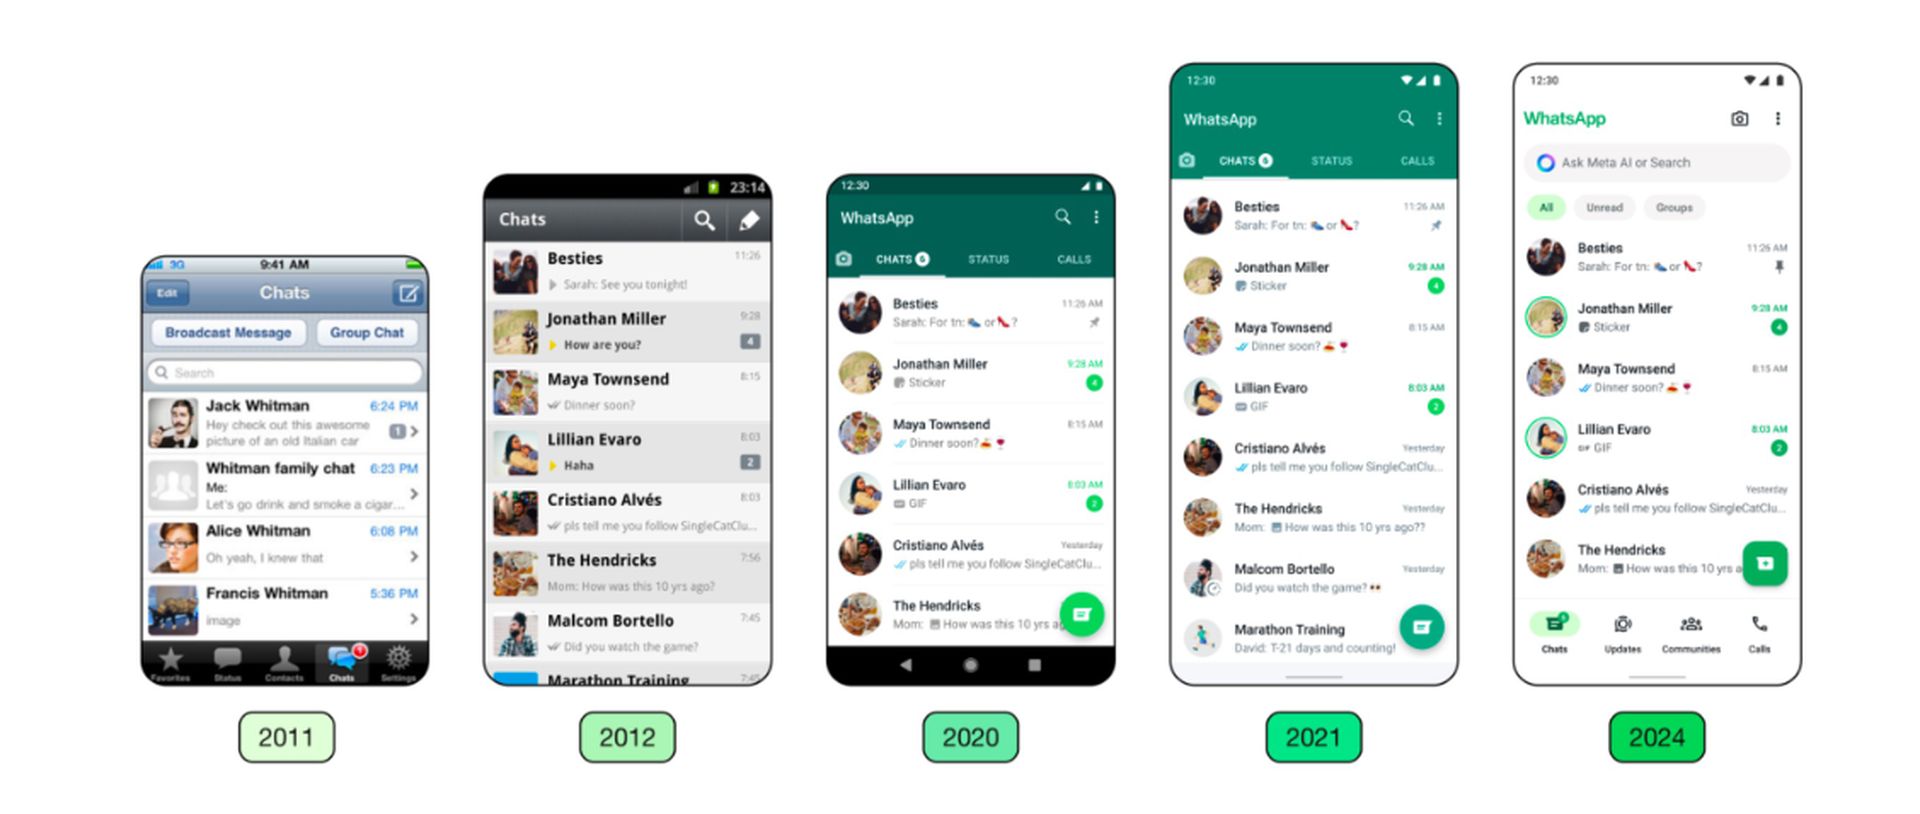 WhatsApp has changed its iOS and Android UI